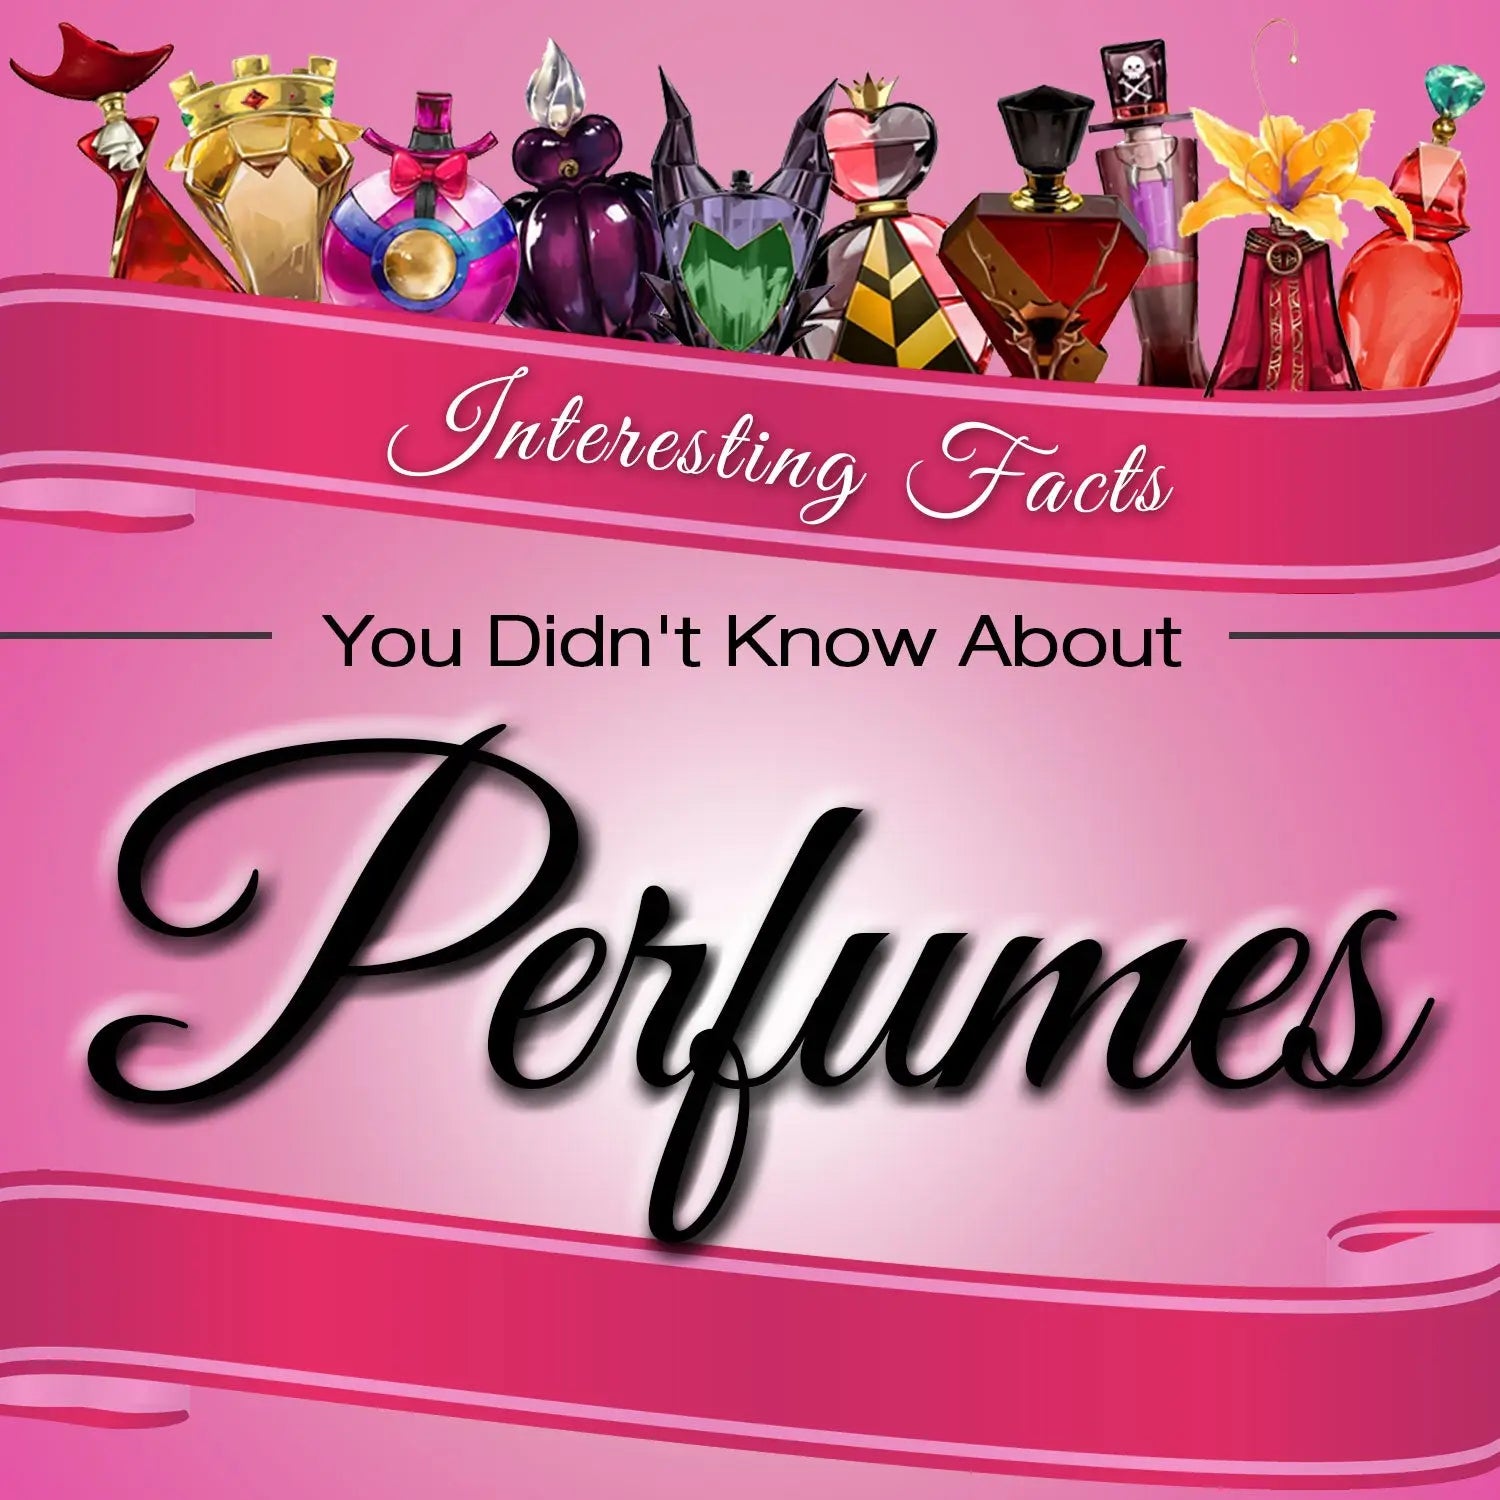 8 INTERESTING FACTS YOU DIDN’T KNOW ABOUT PERFUMES